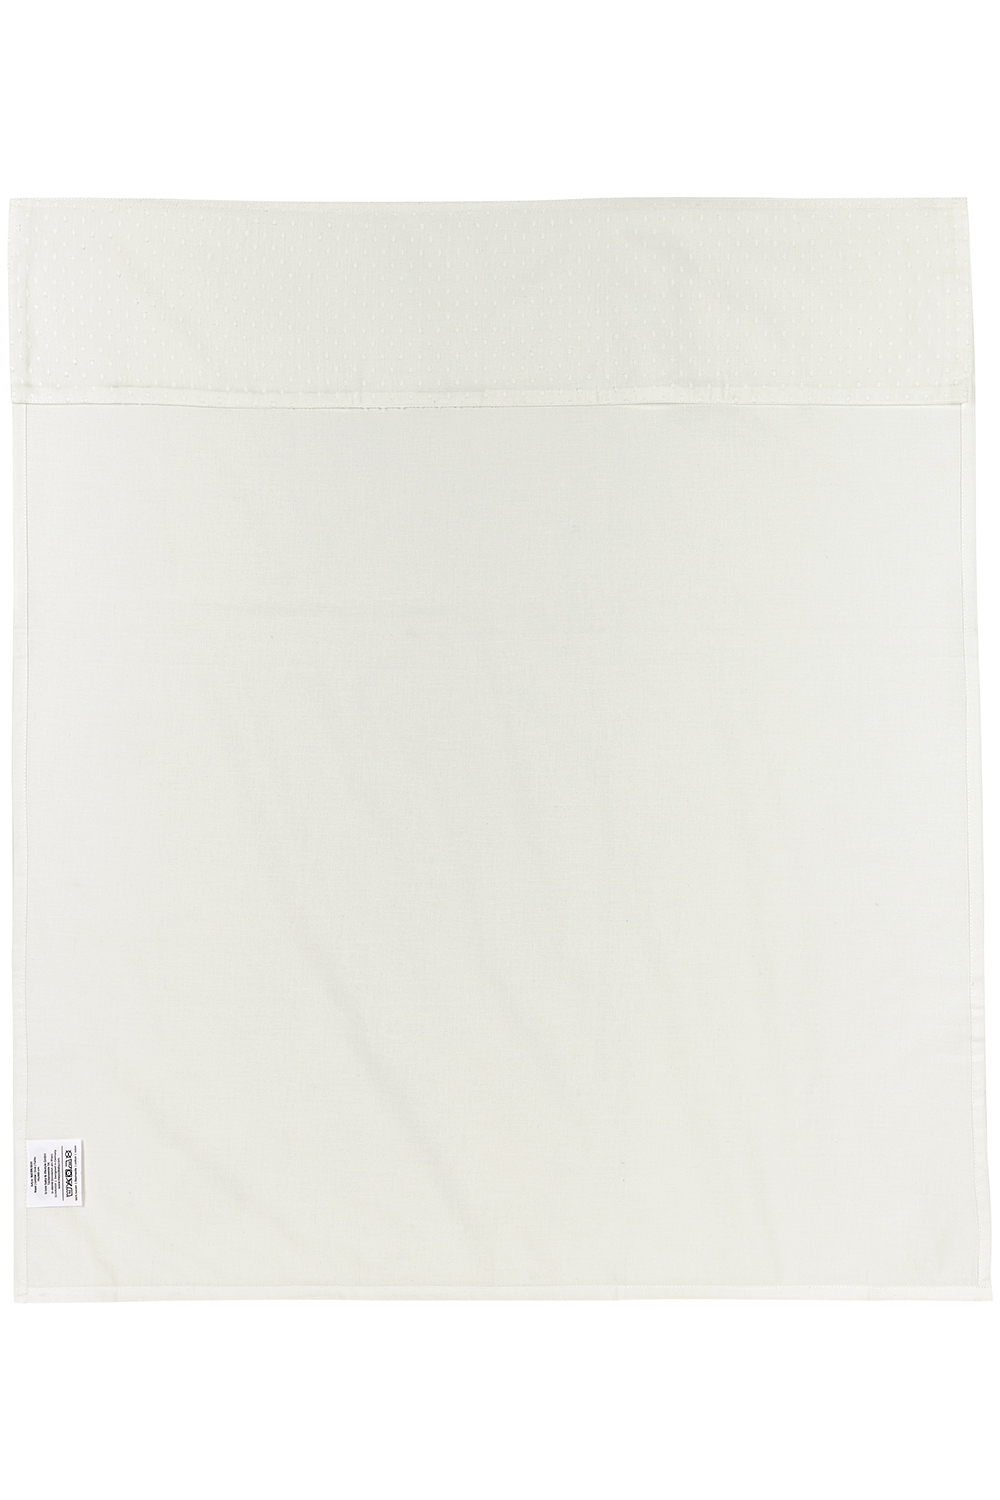 Cot bed sheet Plume - offwhite - 100x150cm